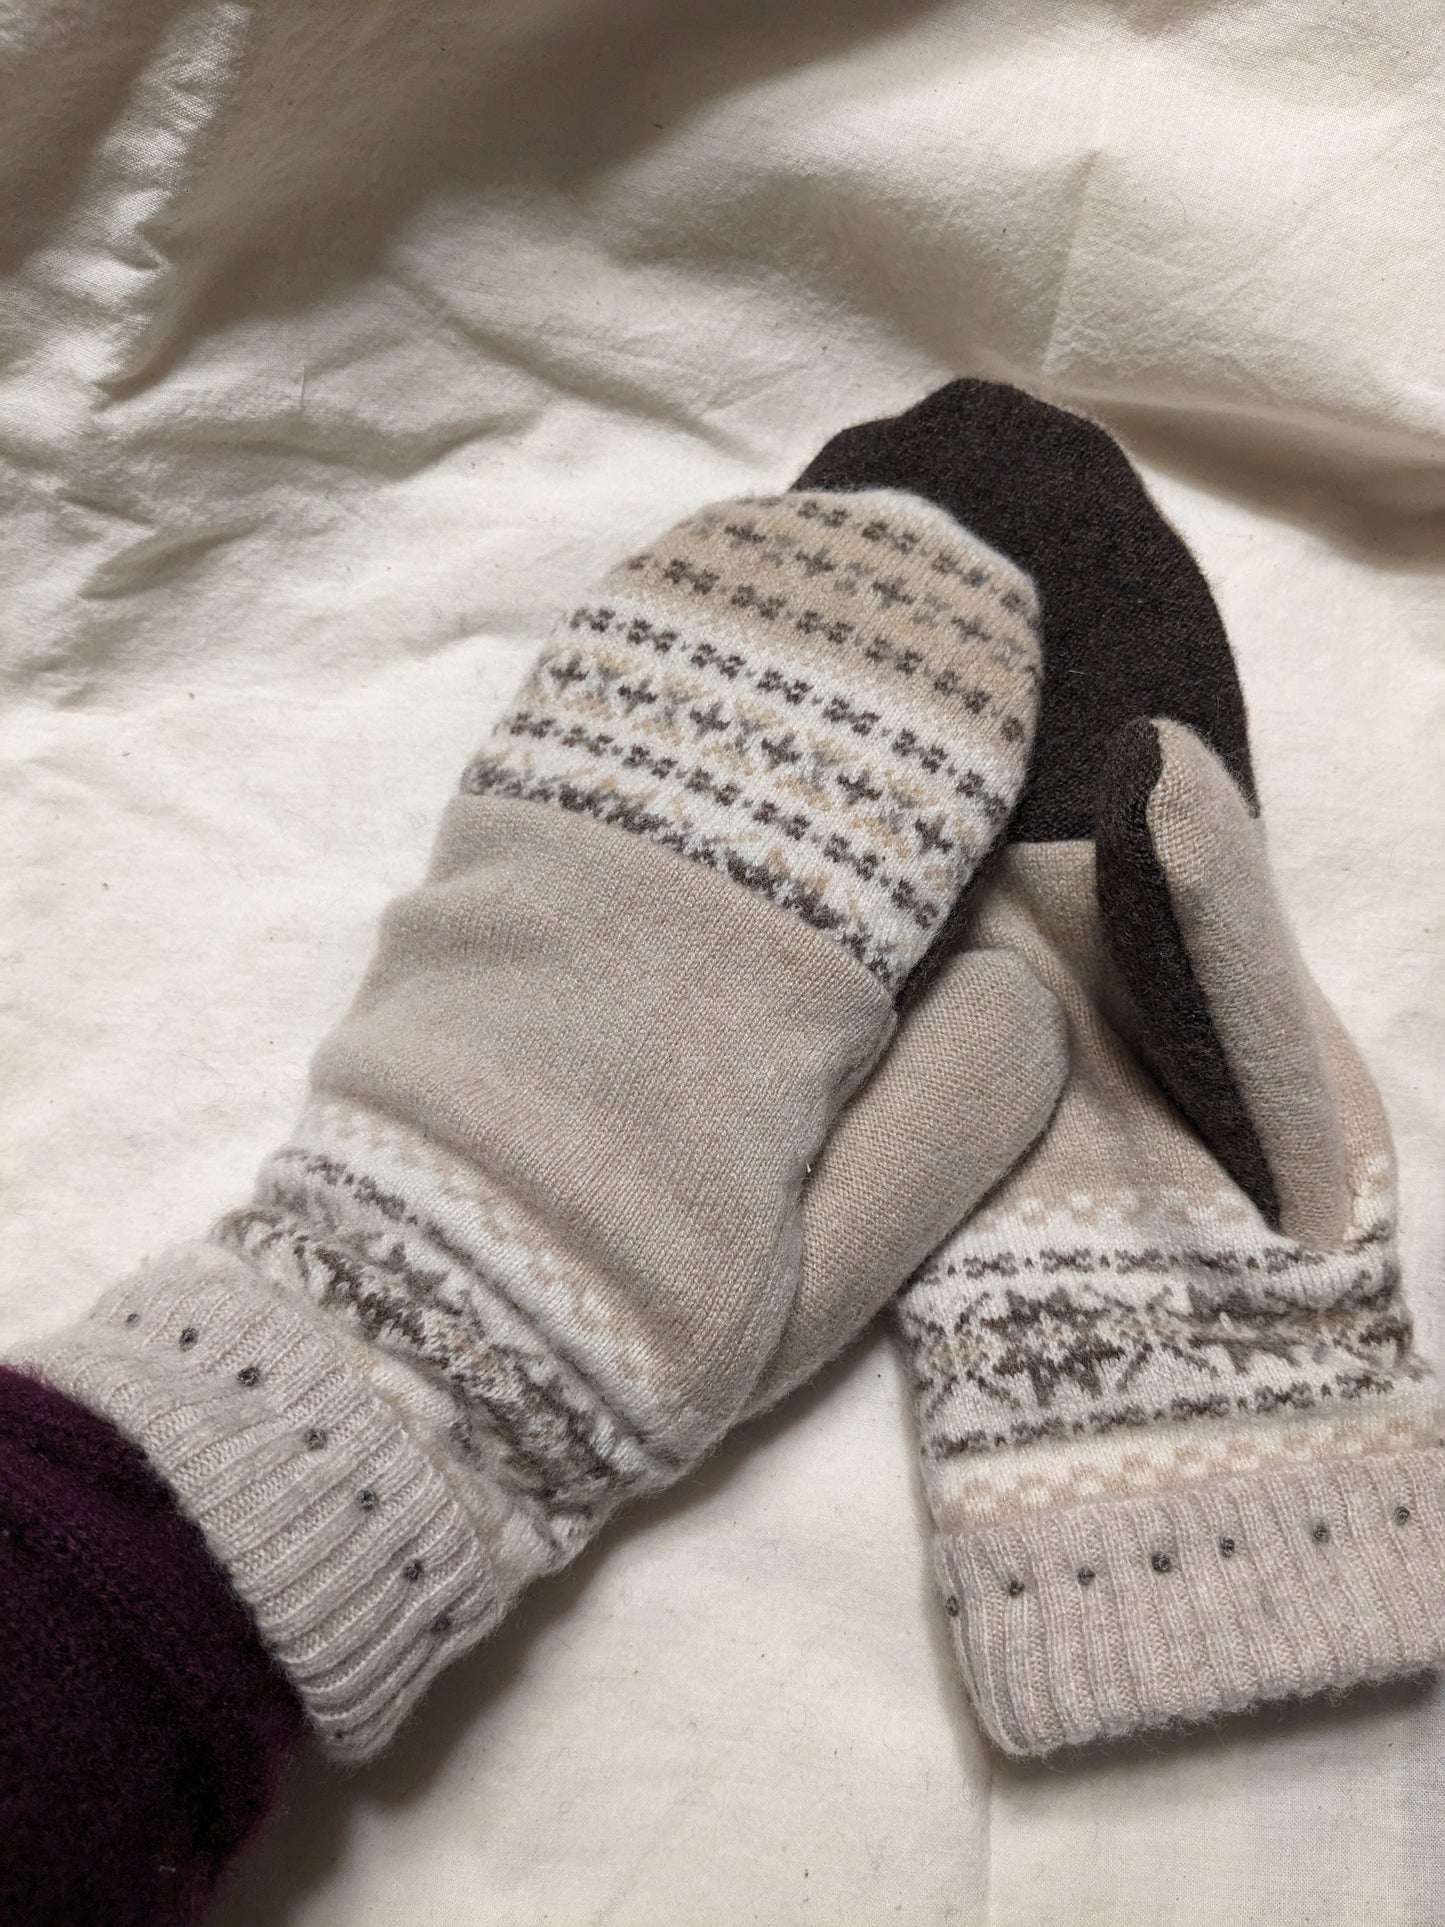 Double Cashmere Mittens - Patterned with Black and Tan